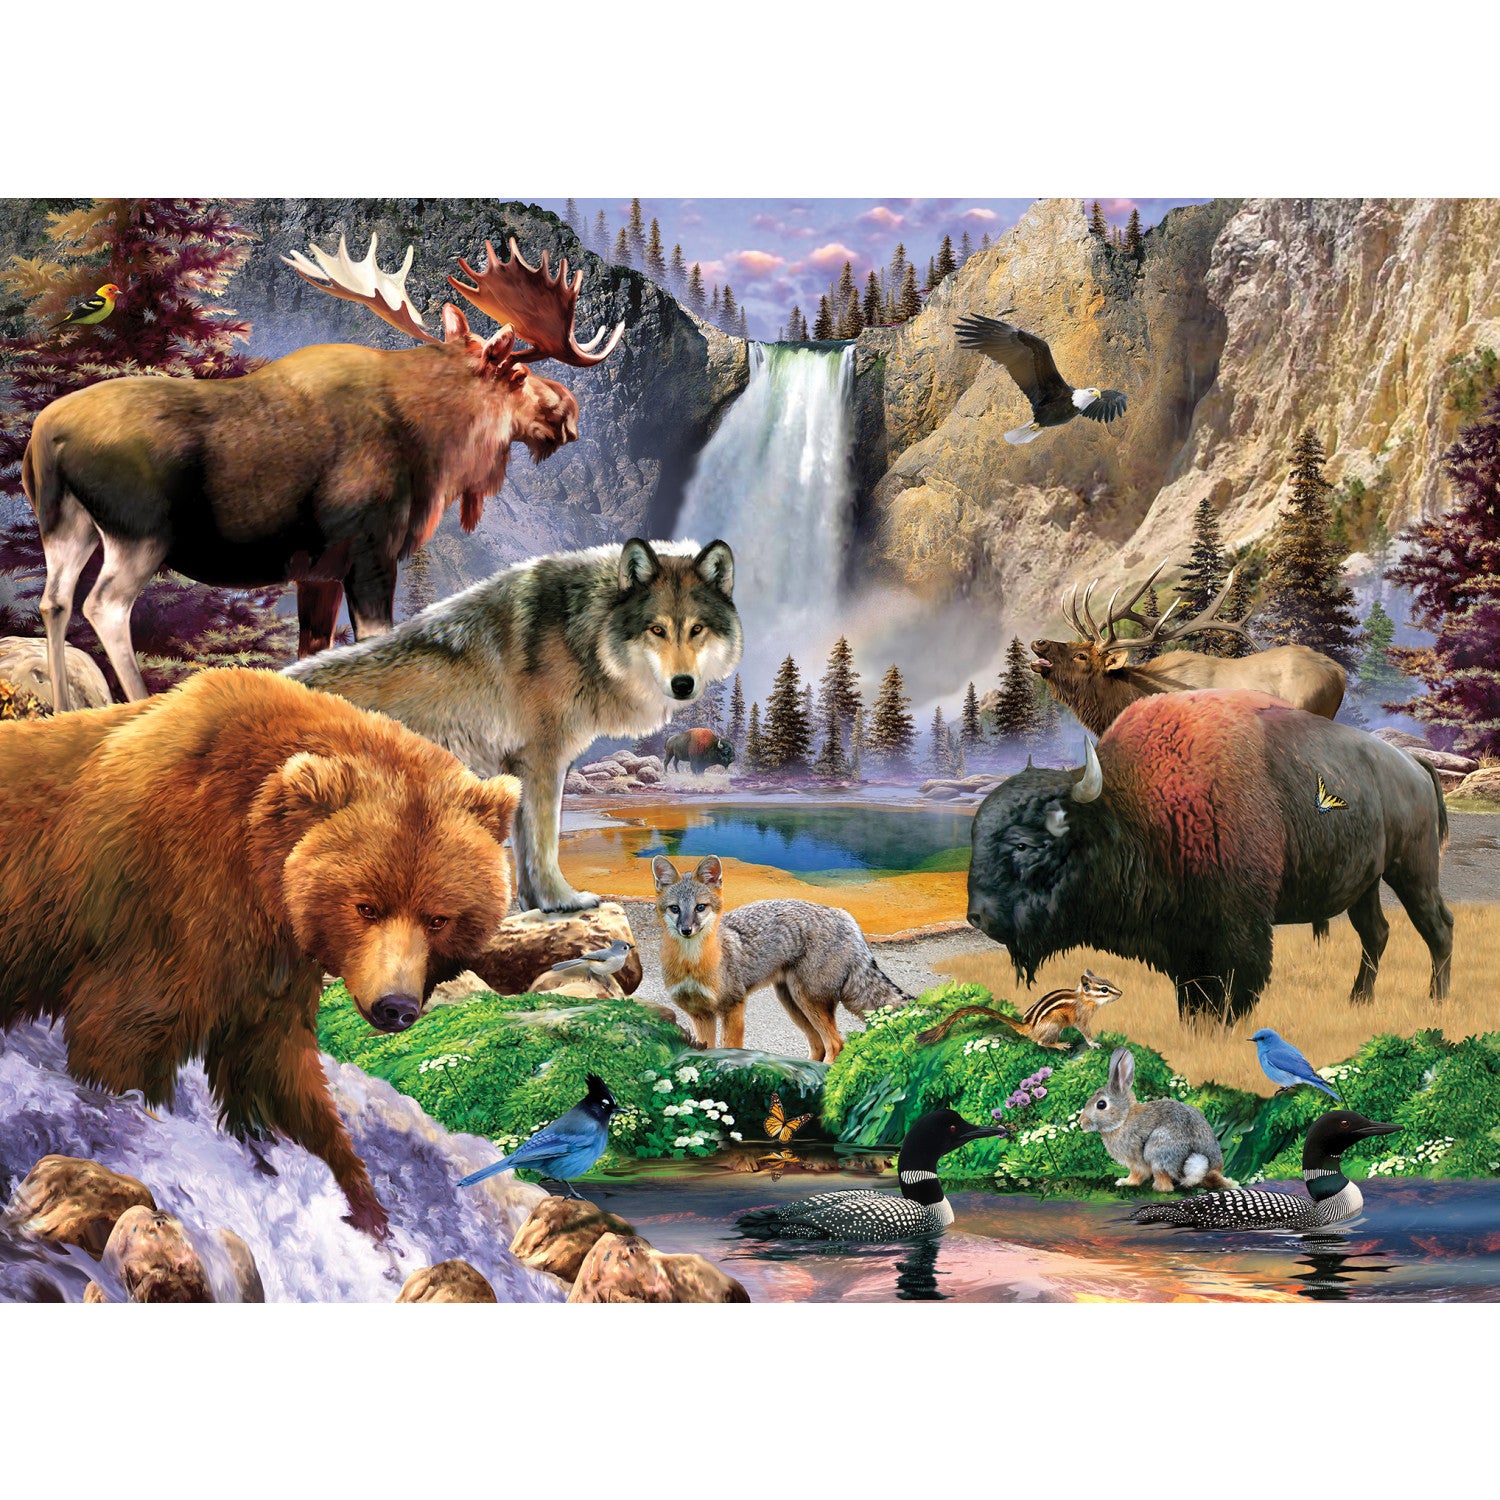 National Parks - Yellowstone National Park 100 Piece Kids Puzzle